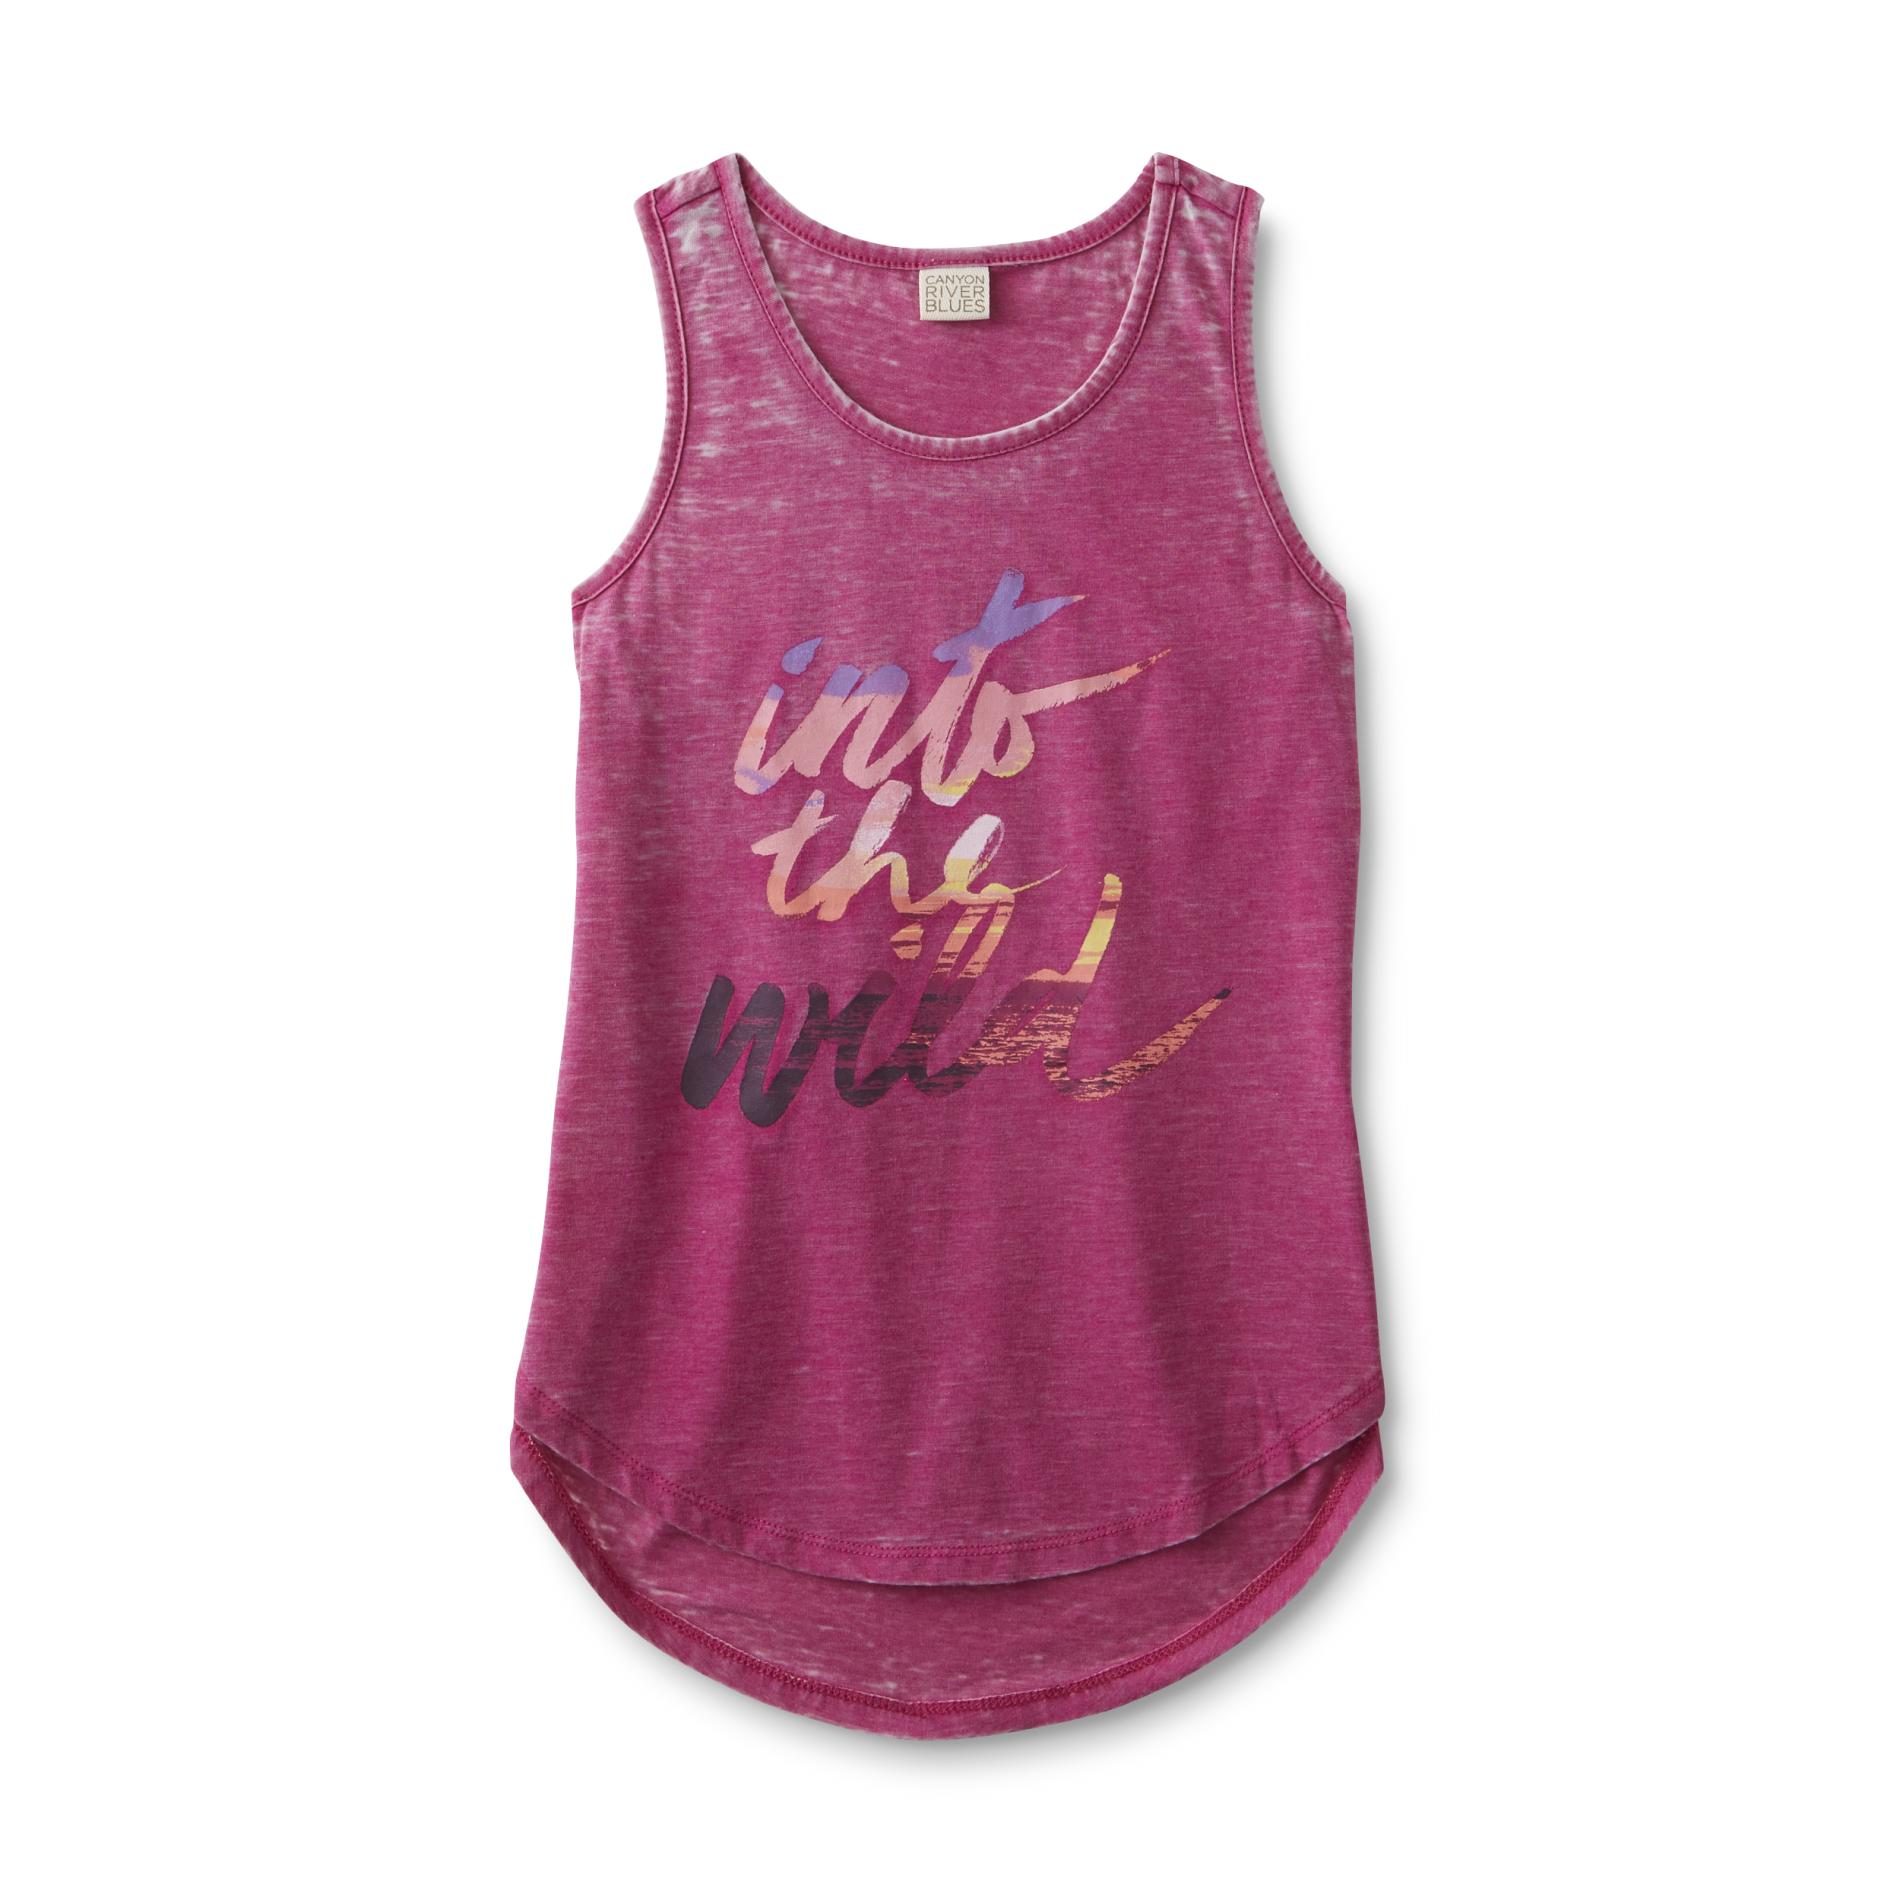 Girl's Graphic Tank Top - Into the Wild